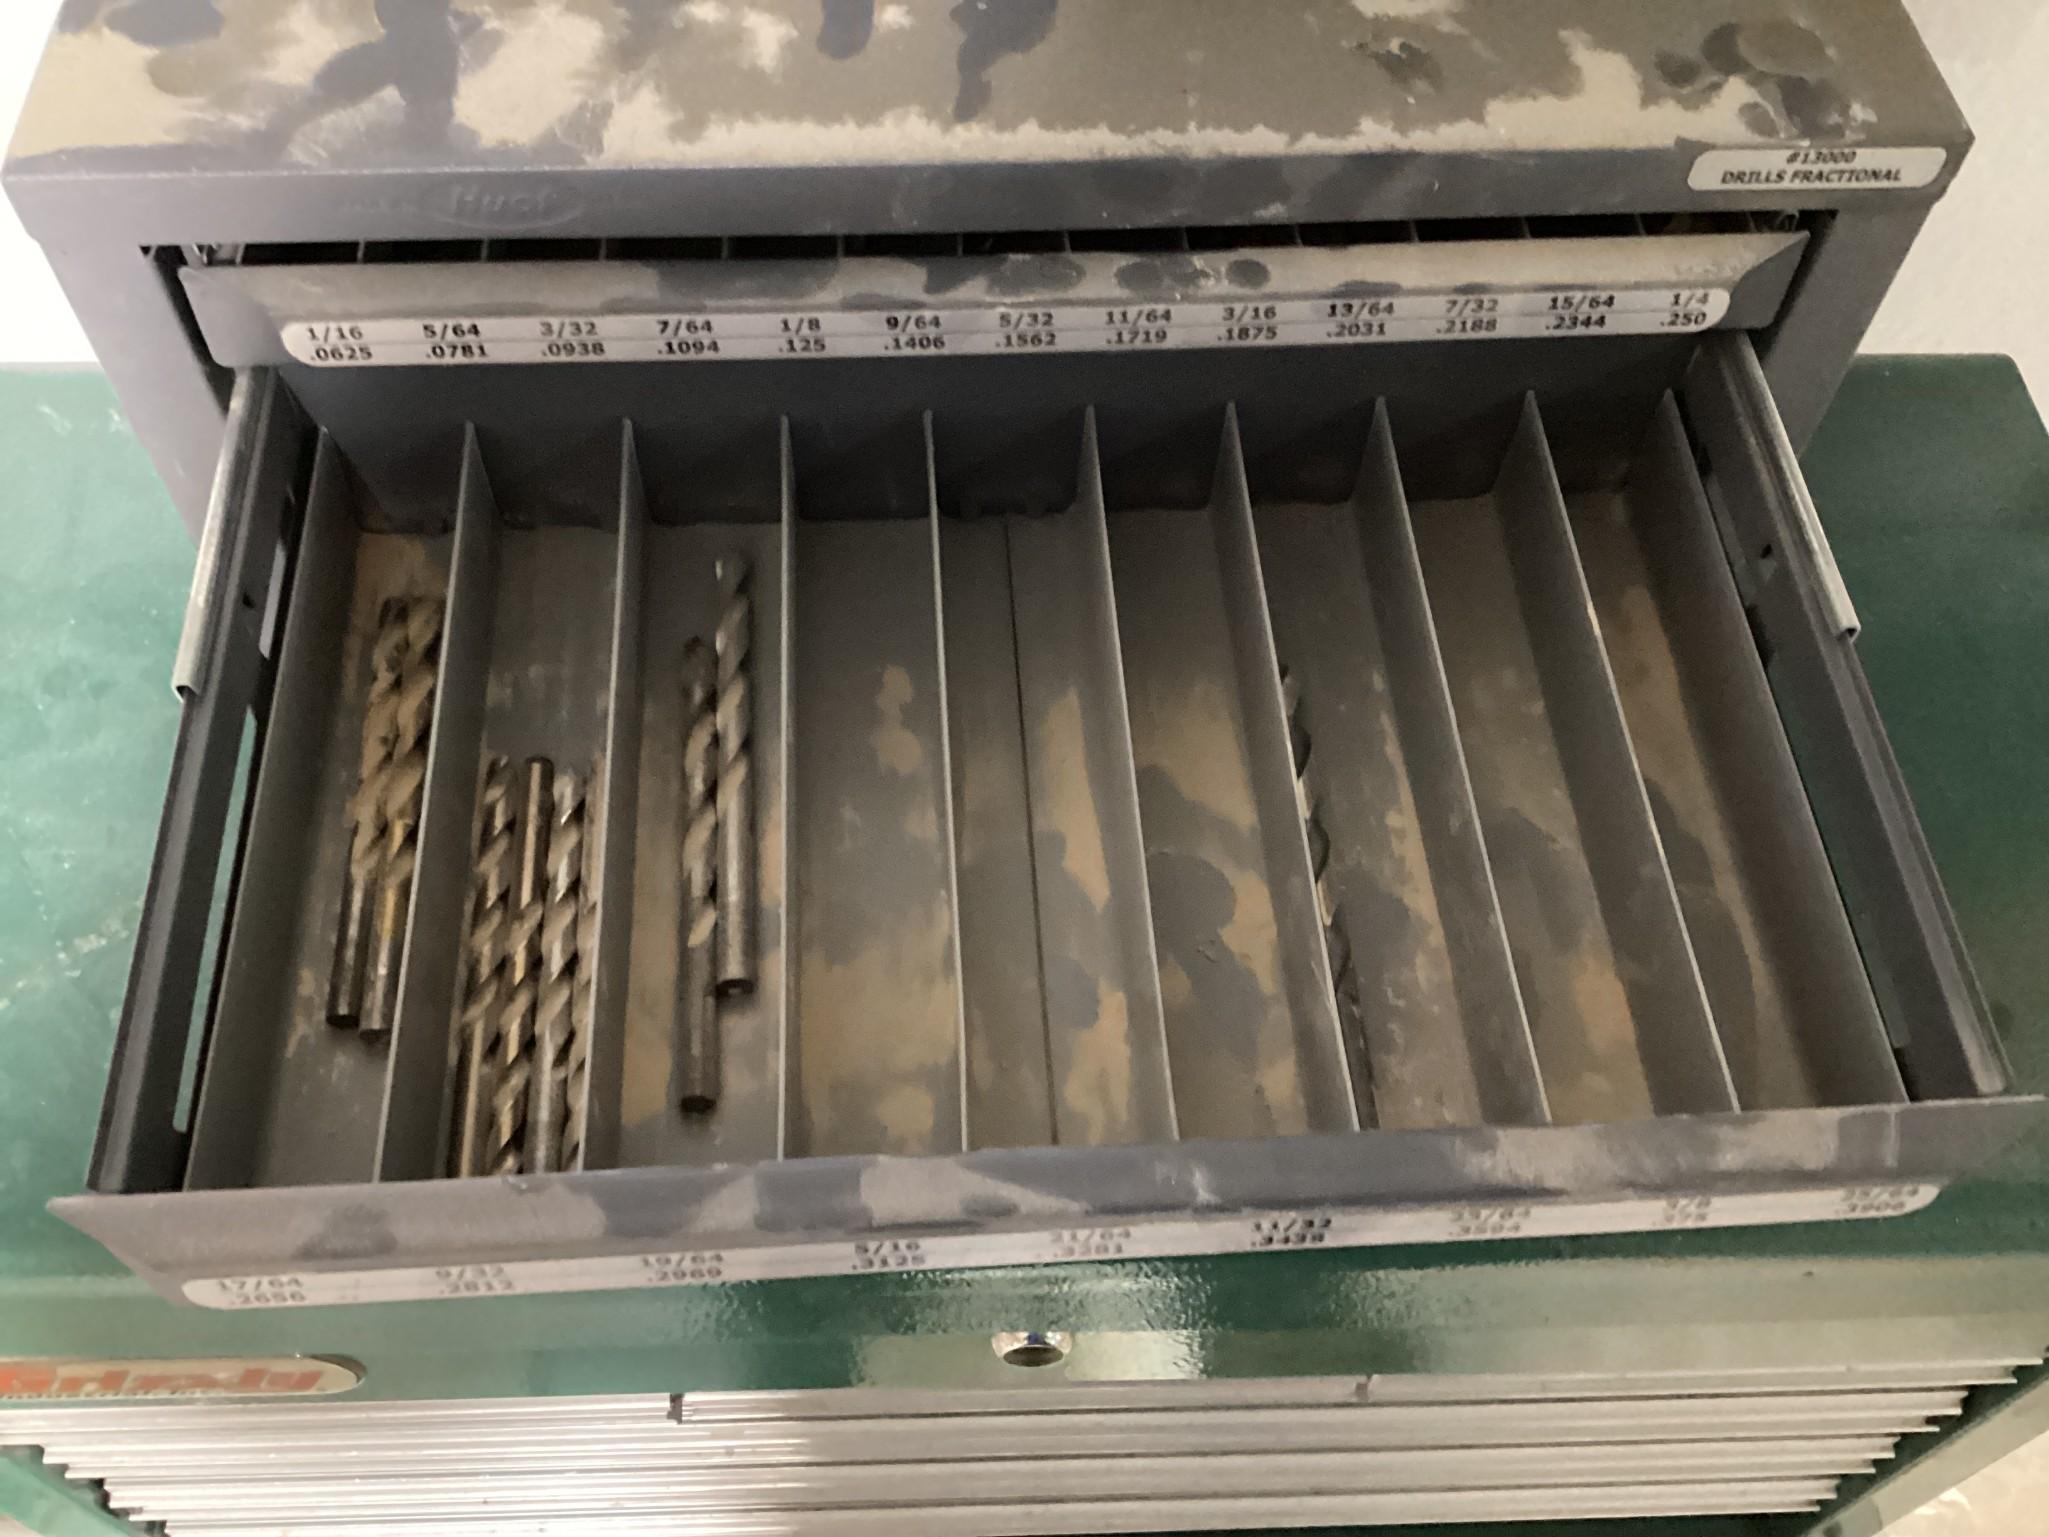 Grizzly 6 Drawer Tool Chest and Drill Bit Organizer with Drill Bits